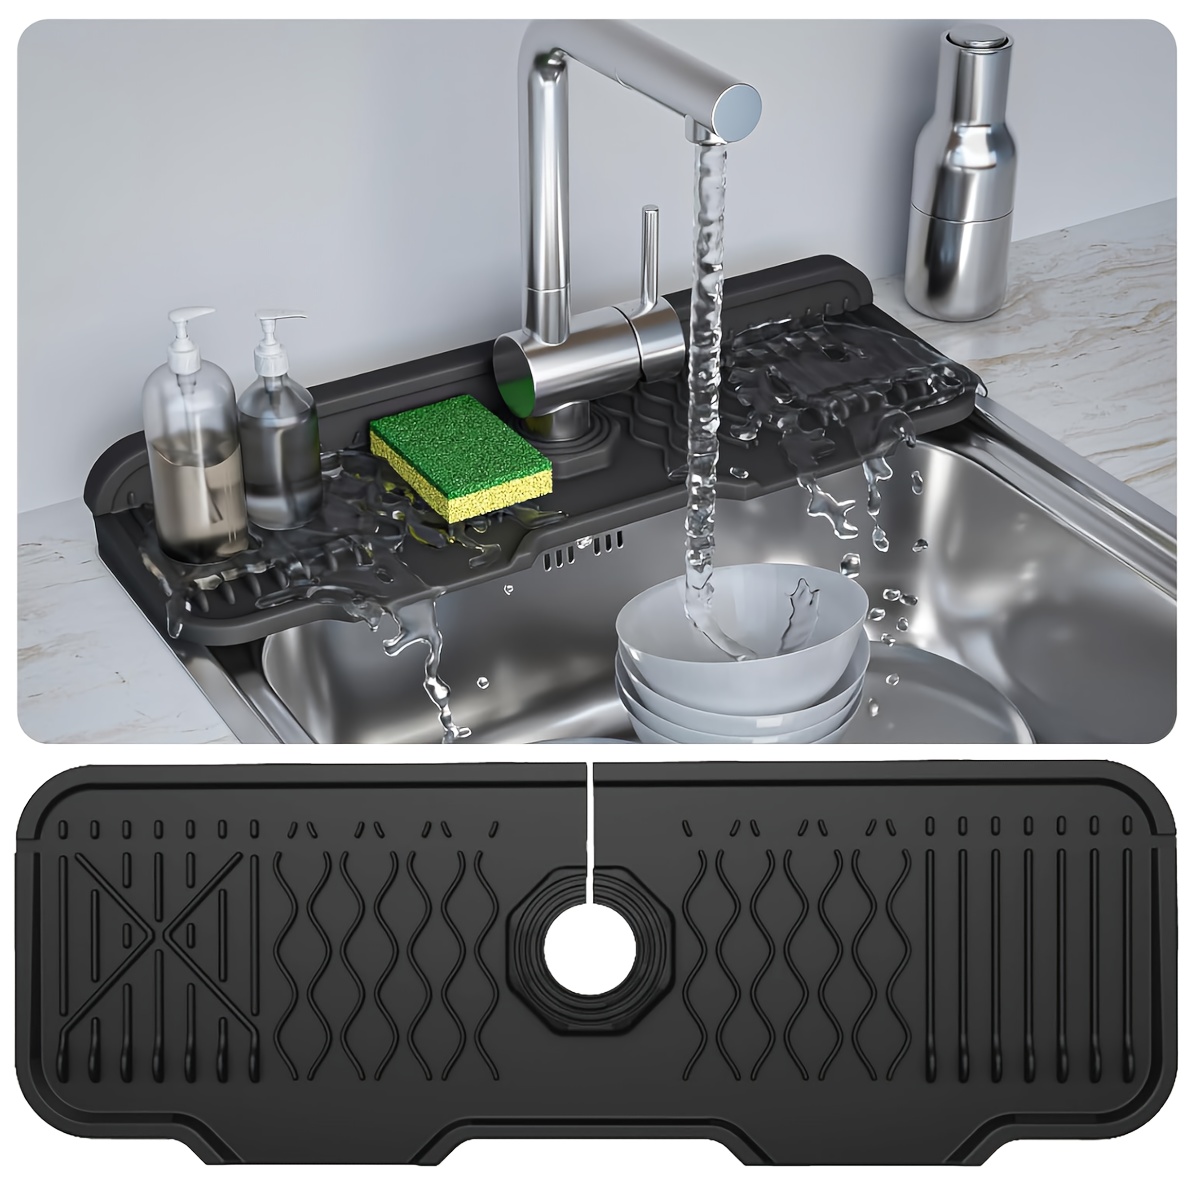 

Space-saving Silicone Kitchen Sink Organizer With Soap Dispenser & Sponge Holder - Faucet Drip Catcher Tray, Draining Mat For Kitchen & Bathroom